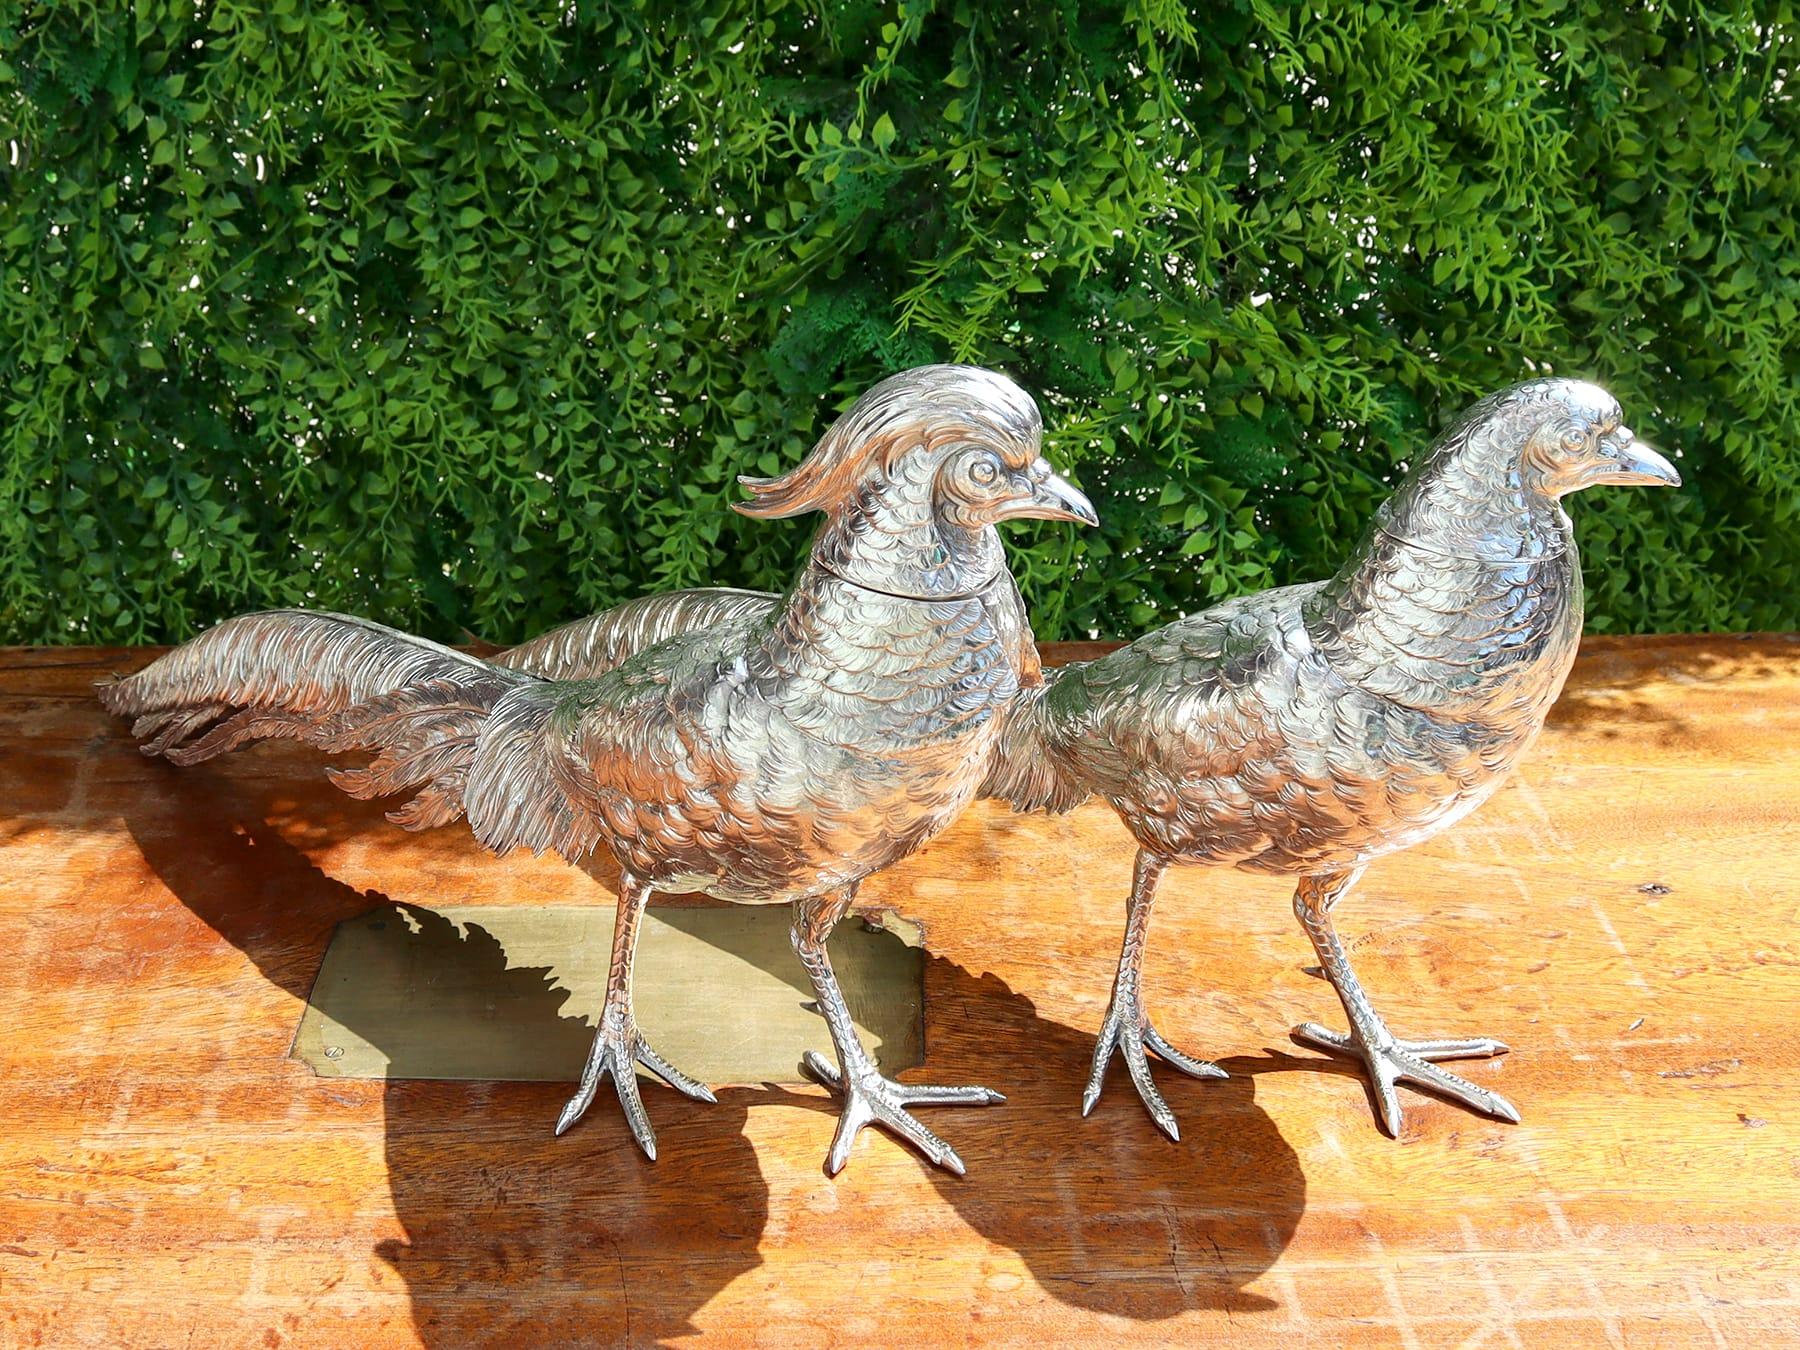 A magnificent, fine and impressive, large pair of antique English import cast sterling silver pheasant sugar boxes; part of our diverse ornamental silverware collection

These magnificent, fine and impressive antique cast sterling silver sugar boxes